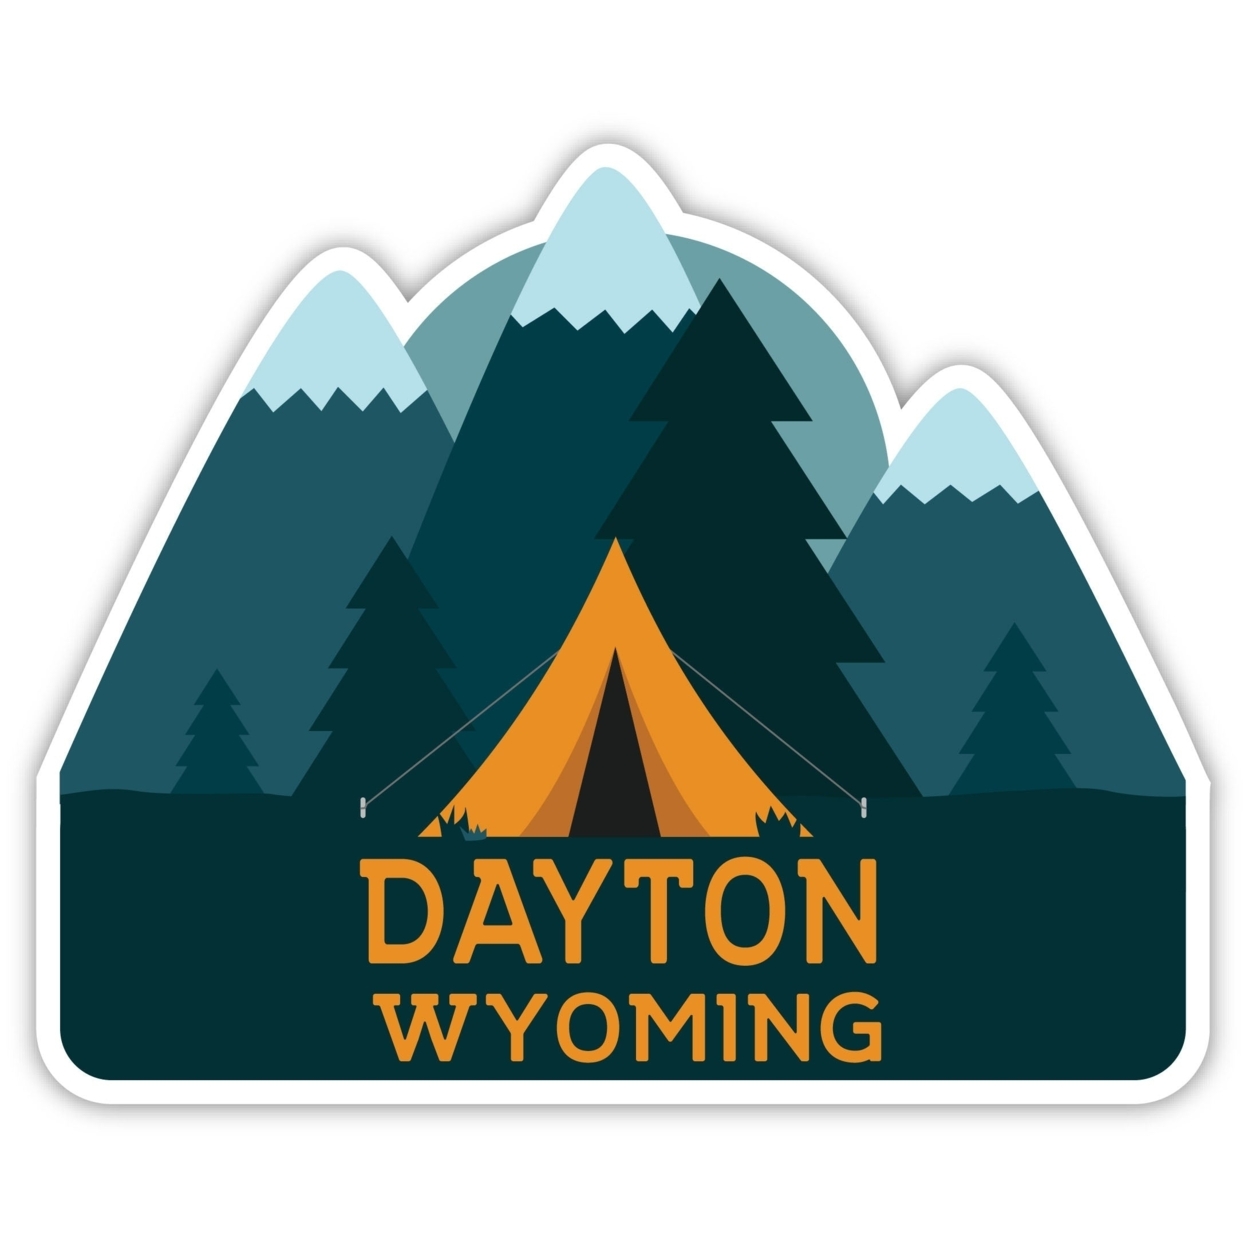 Dayton Wyoming Souvenir Decorative Stickers (Choose Theme And Size) - 4-Pack, 8-Inch, Tent